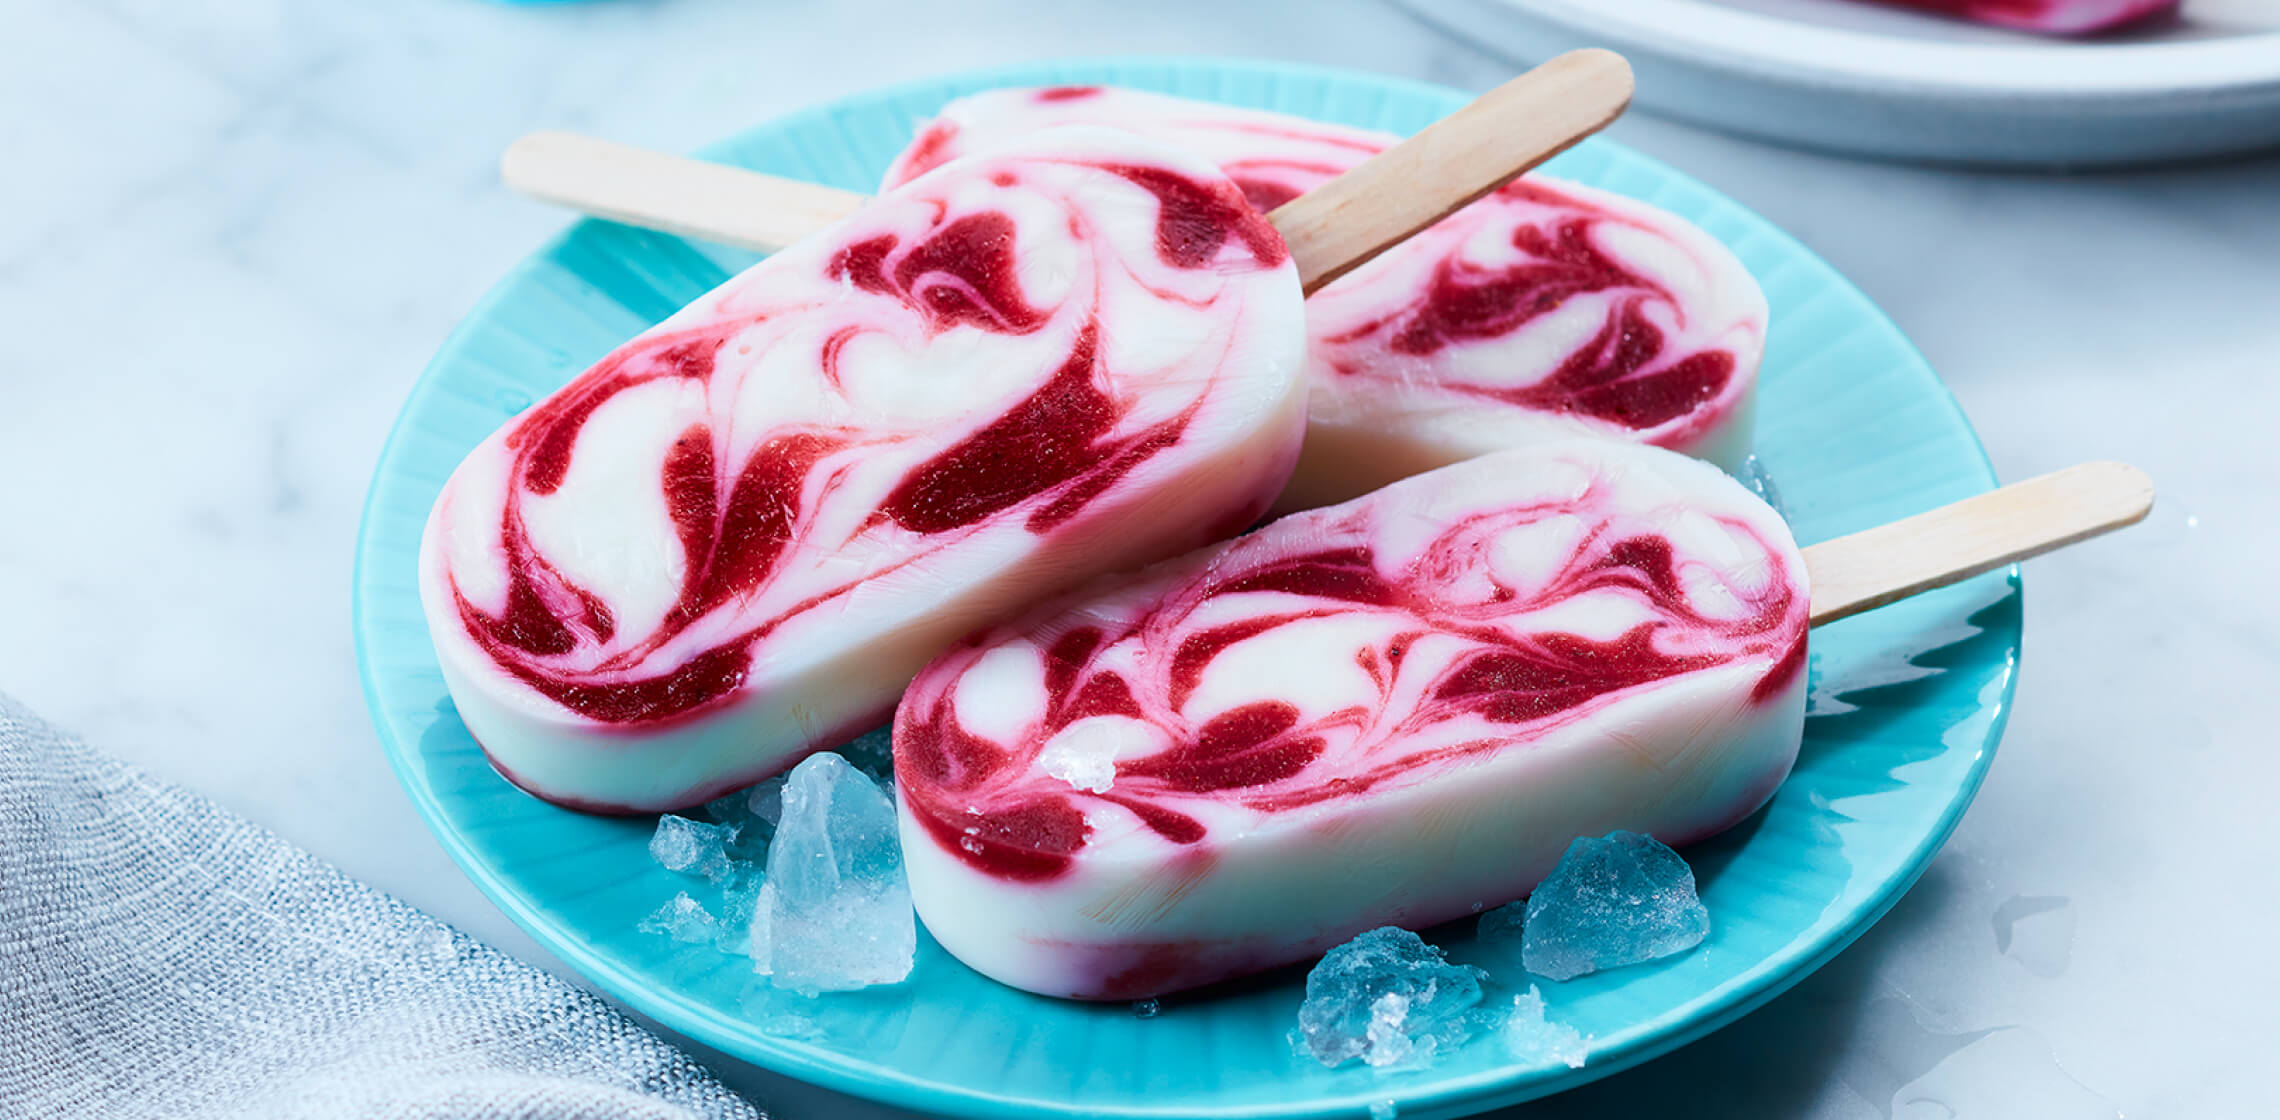 Swirled berry smoothie pops on a light blue plate with a few ice cubes around them.